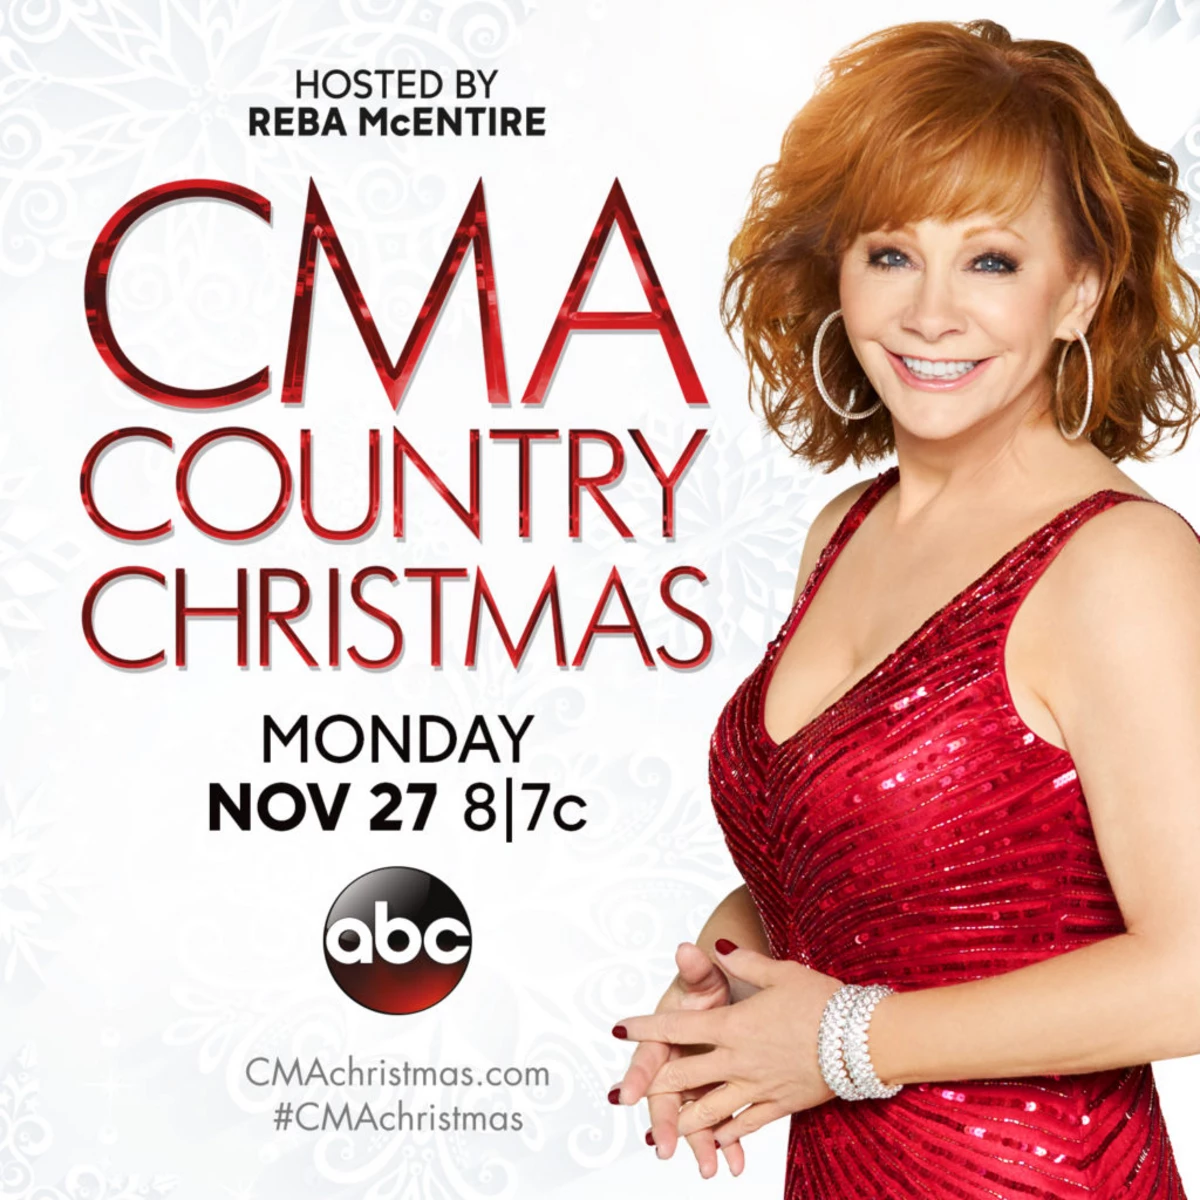 CMA Country Christmas is tonight